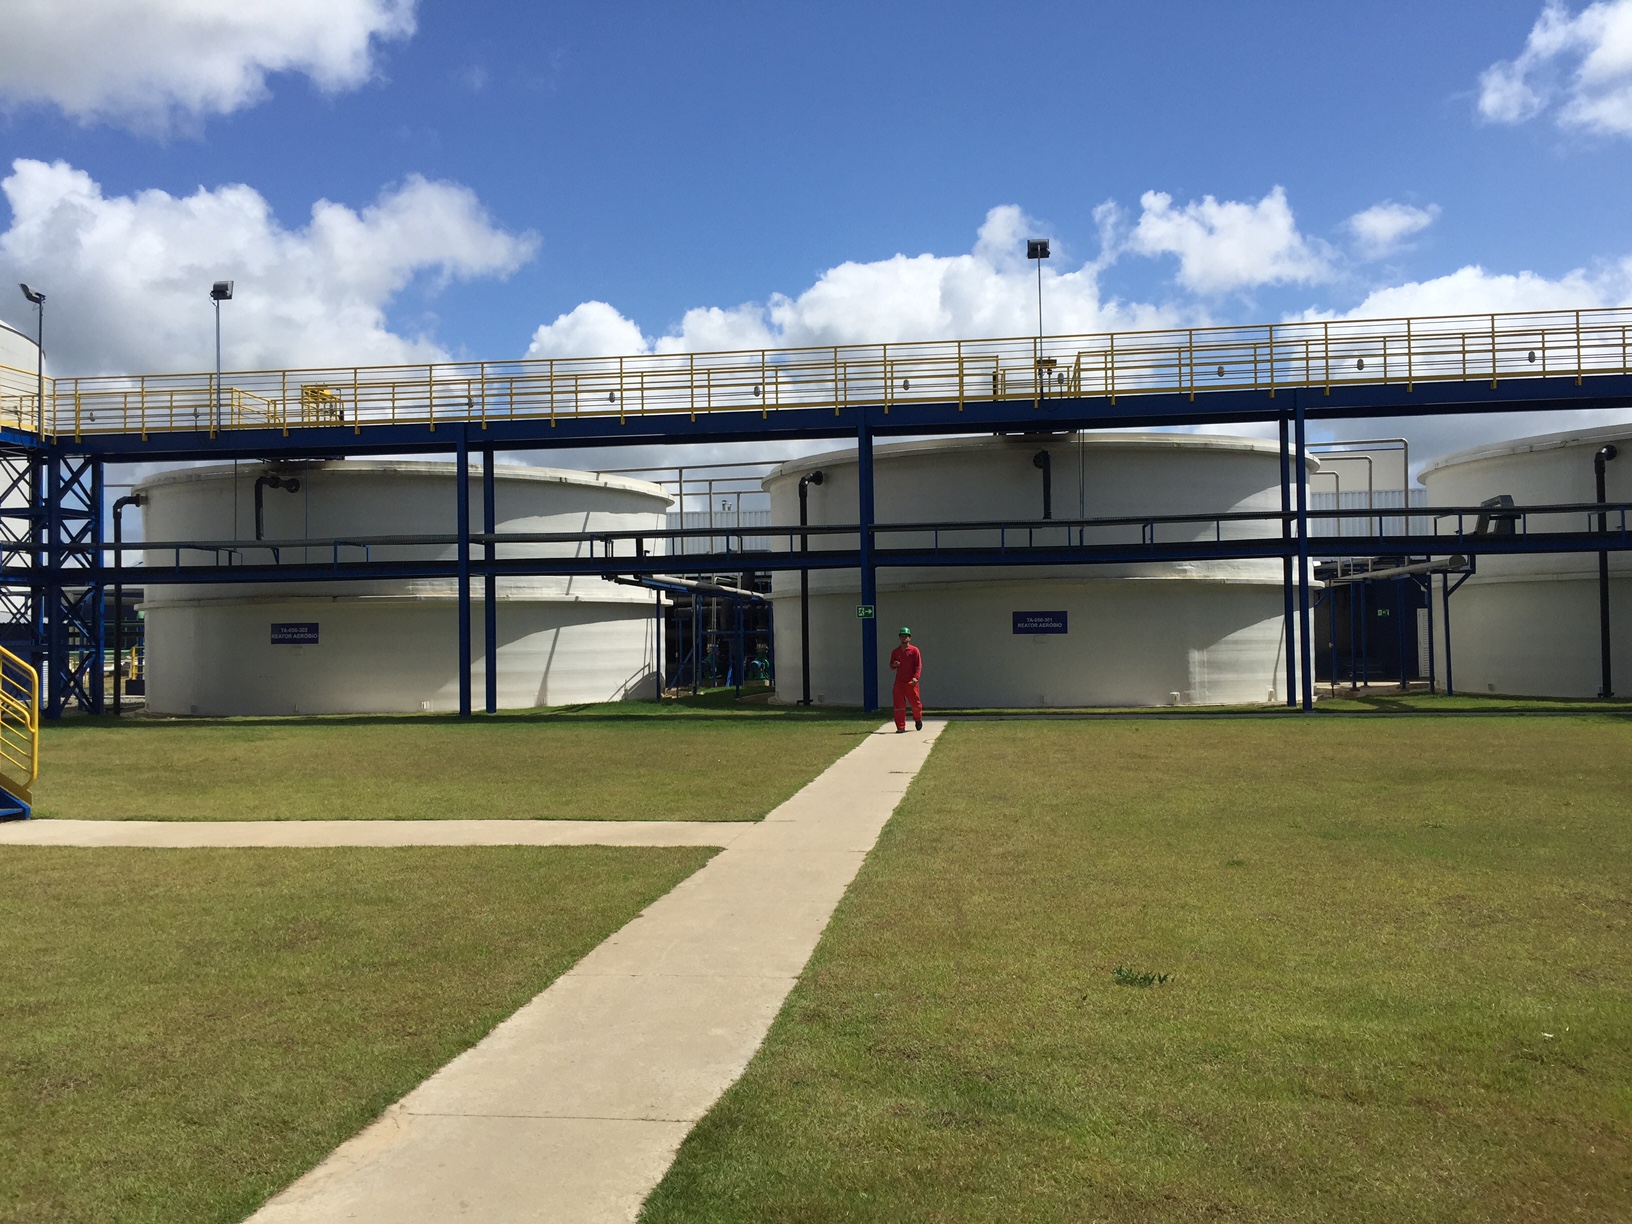 Tecniplas has supplied eight fiber reinforced plastic composite tanks at a plant run by Fiat Chrysler Automobiles (FCA) in Goiana (Brazil).